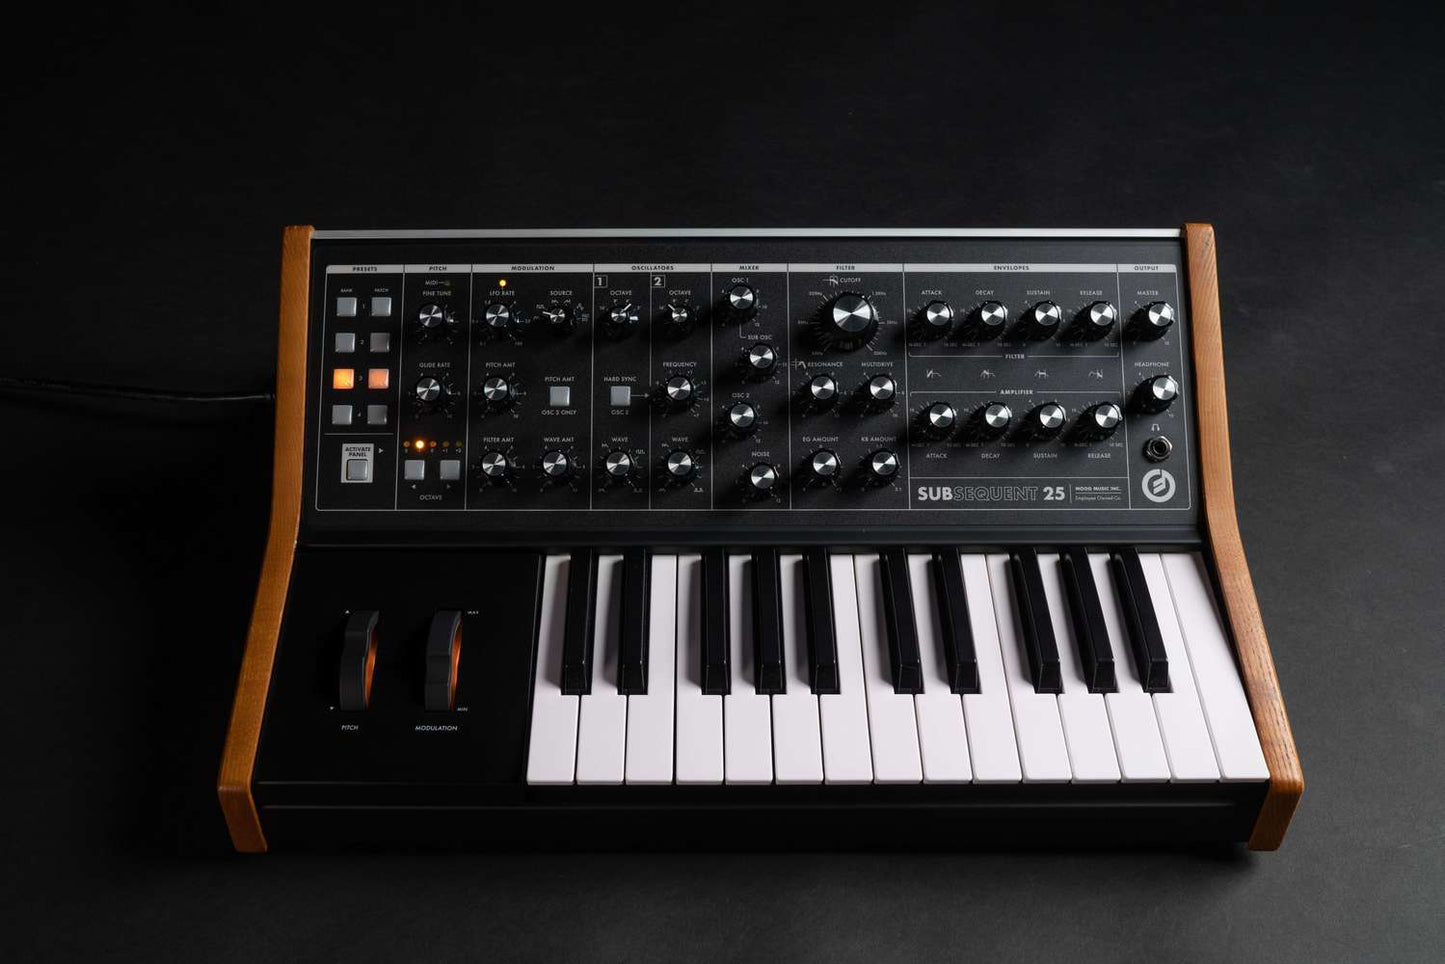 Moog Subsequent 25 2-Note Paraphonic Analog Synthesizer